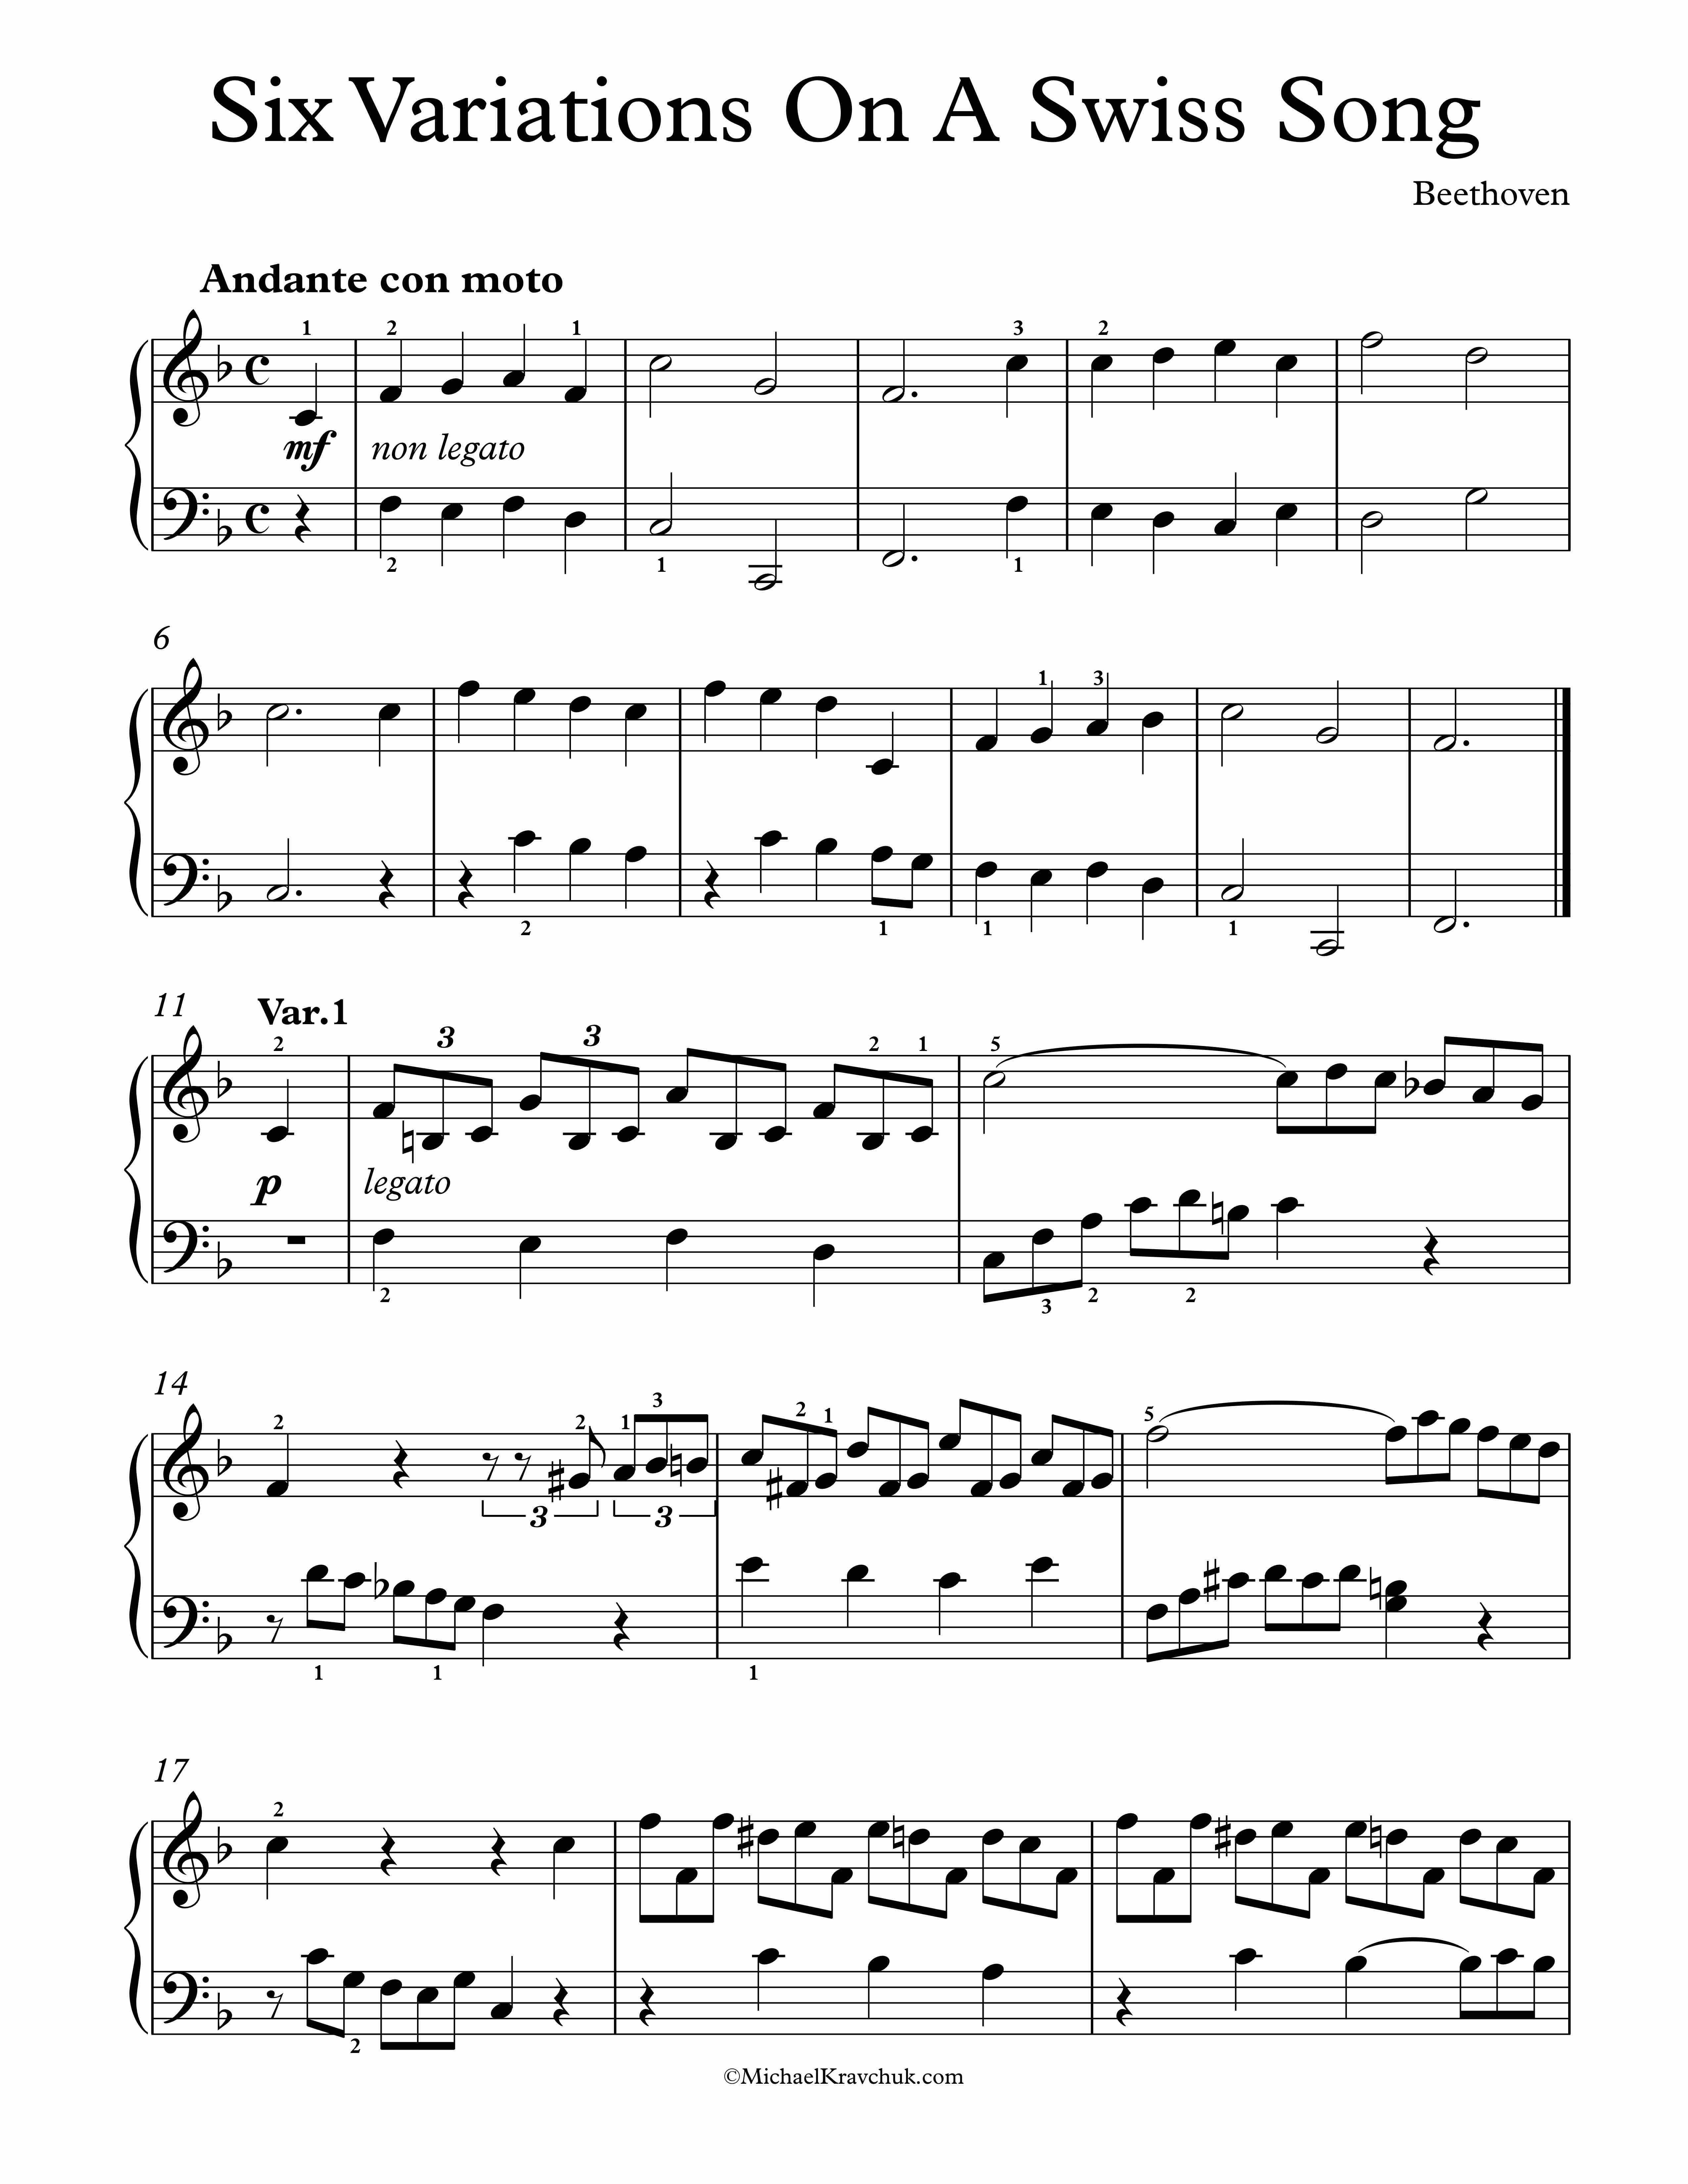 Free Piano Sheet Music - Six Variations On A Swiss Song - Beethoven